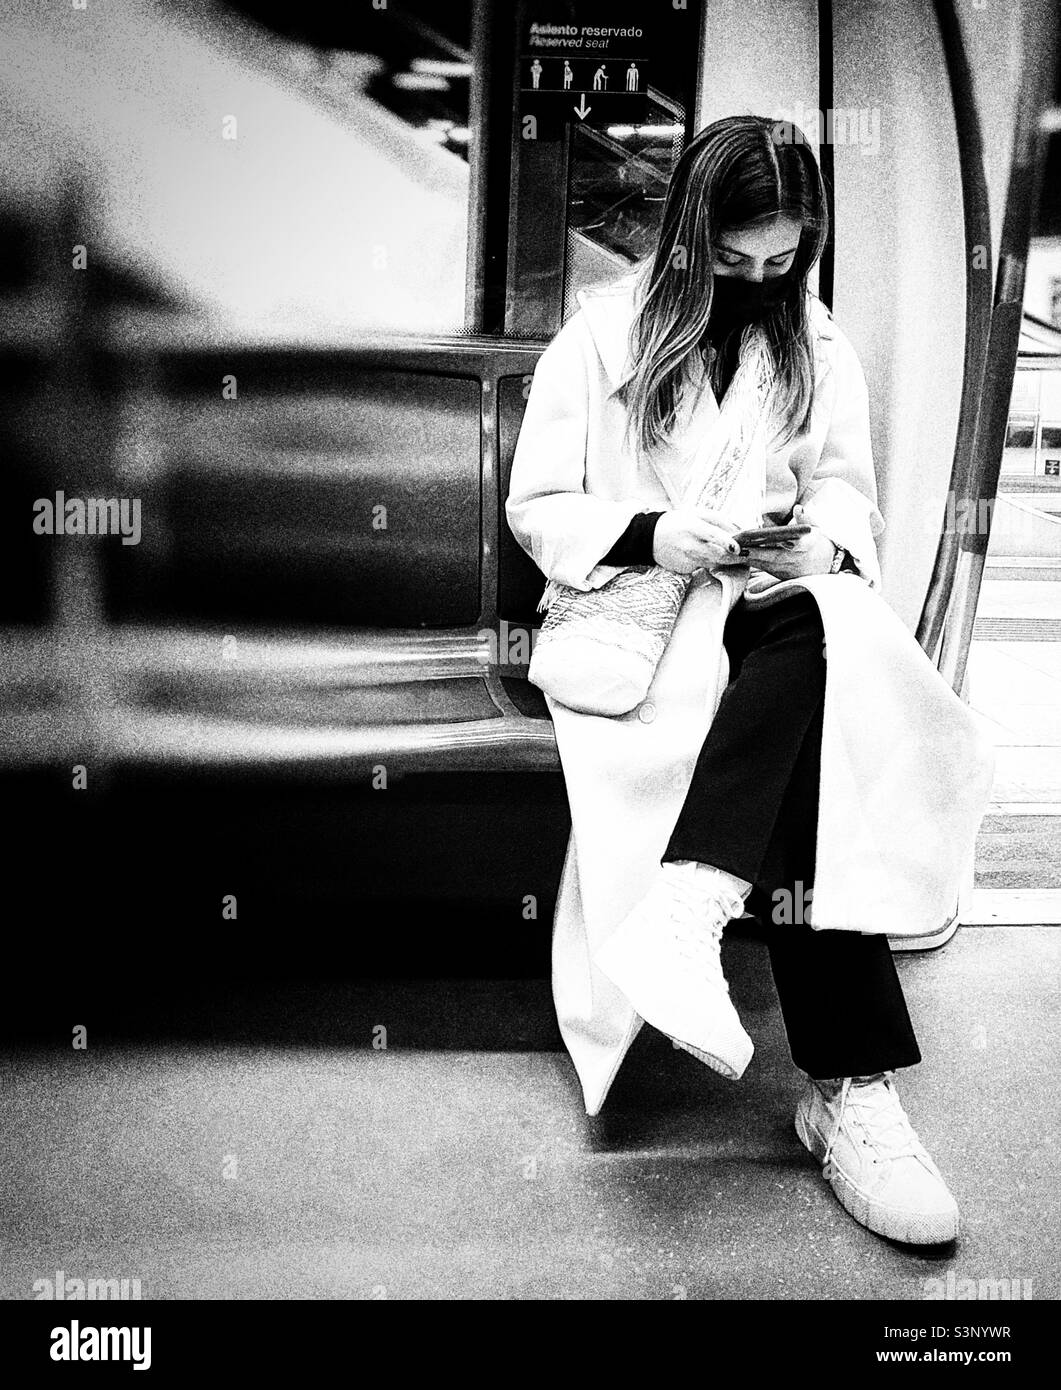 A young lady in an elegant long cream coat sitting on an underground train is checking her mobile phone. The photo is in black and white. Stock Photo